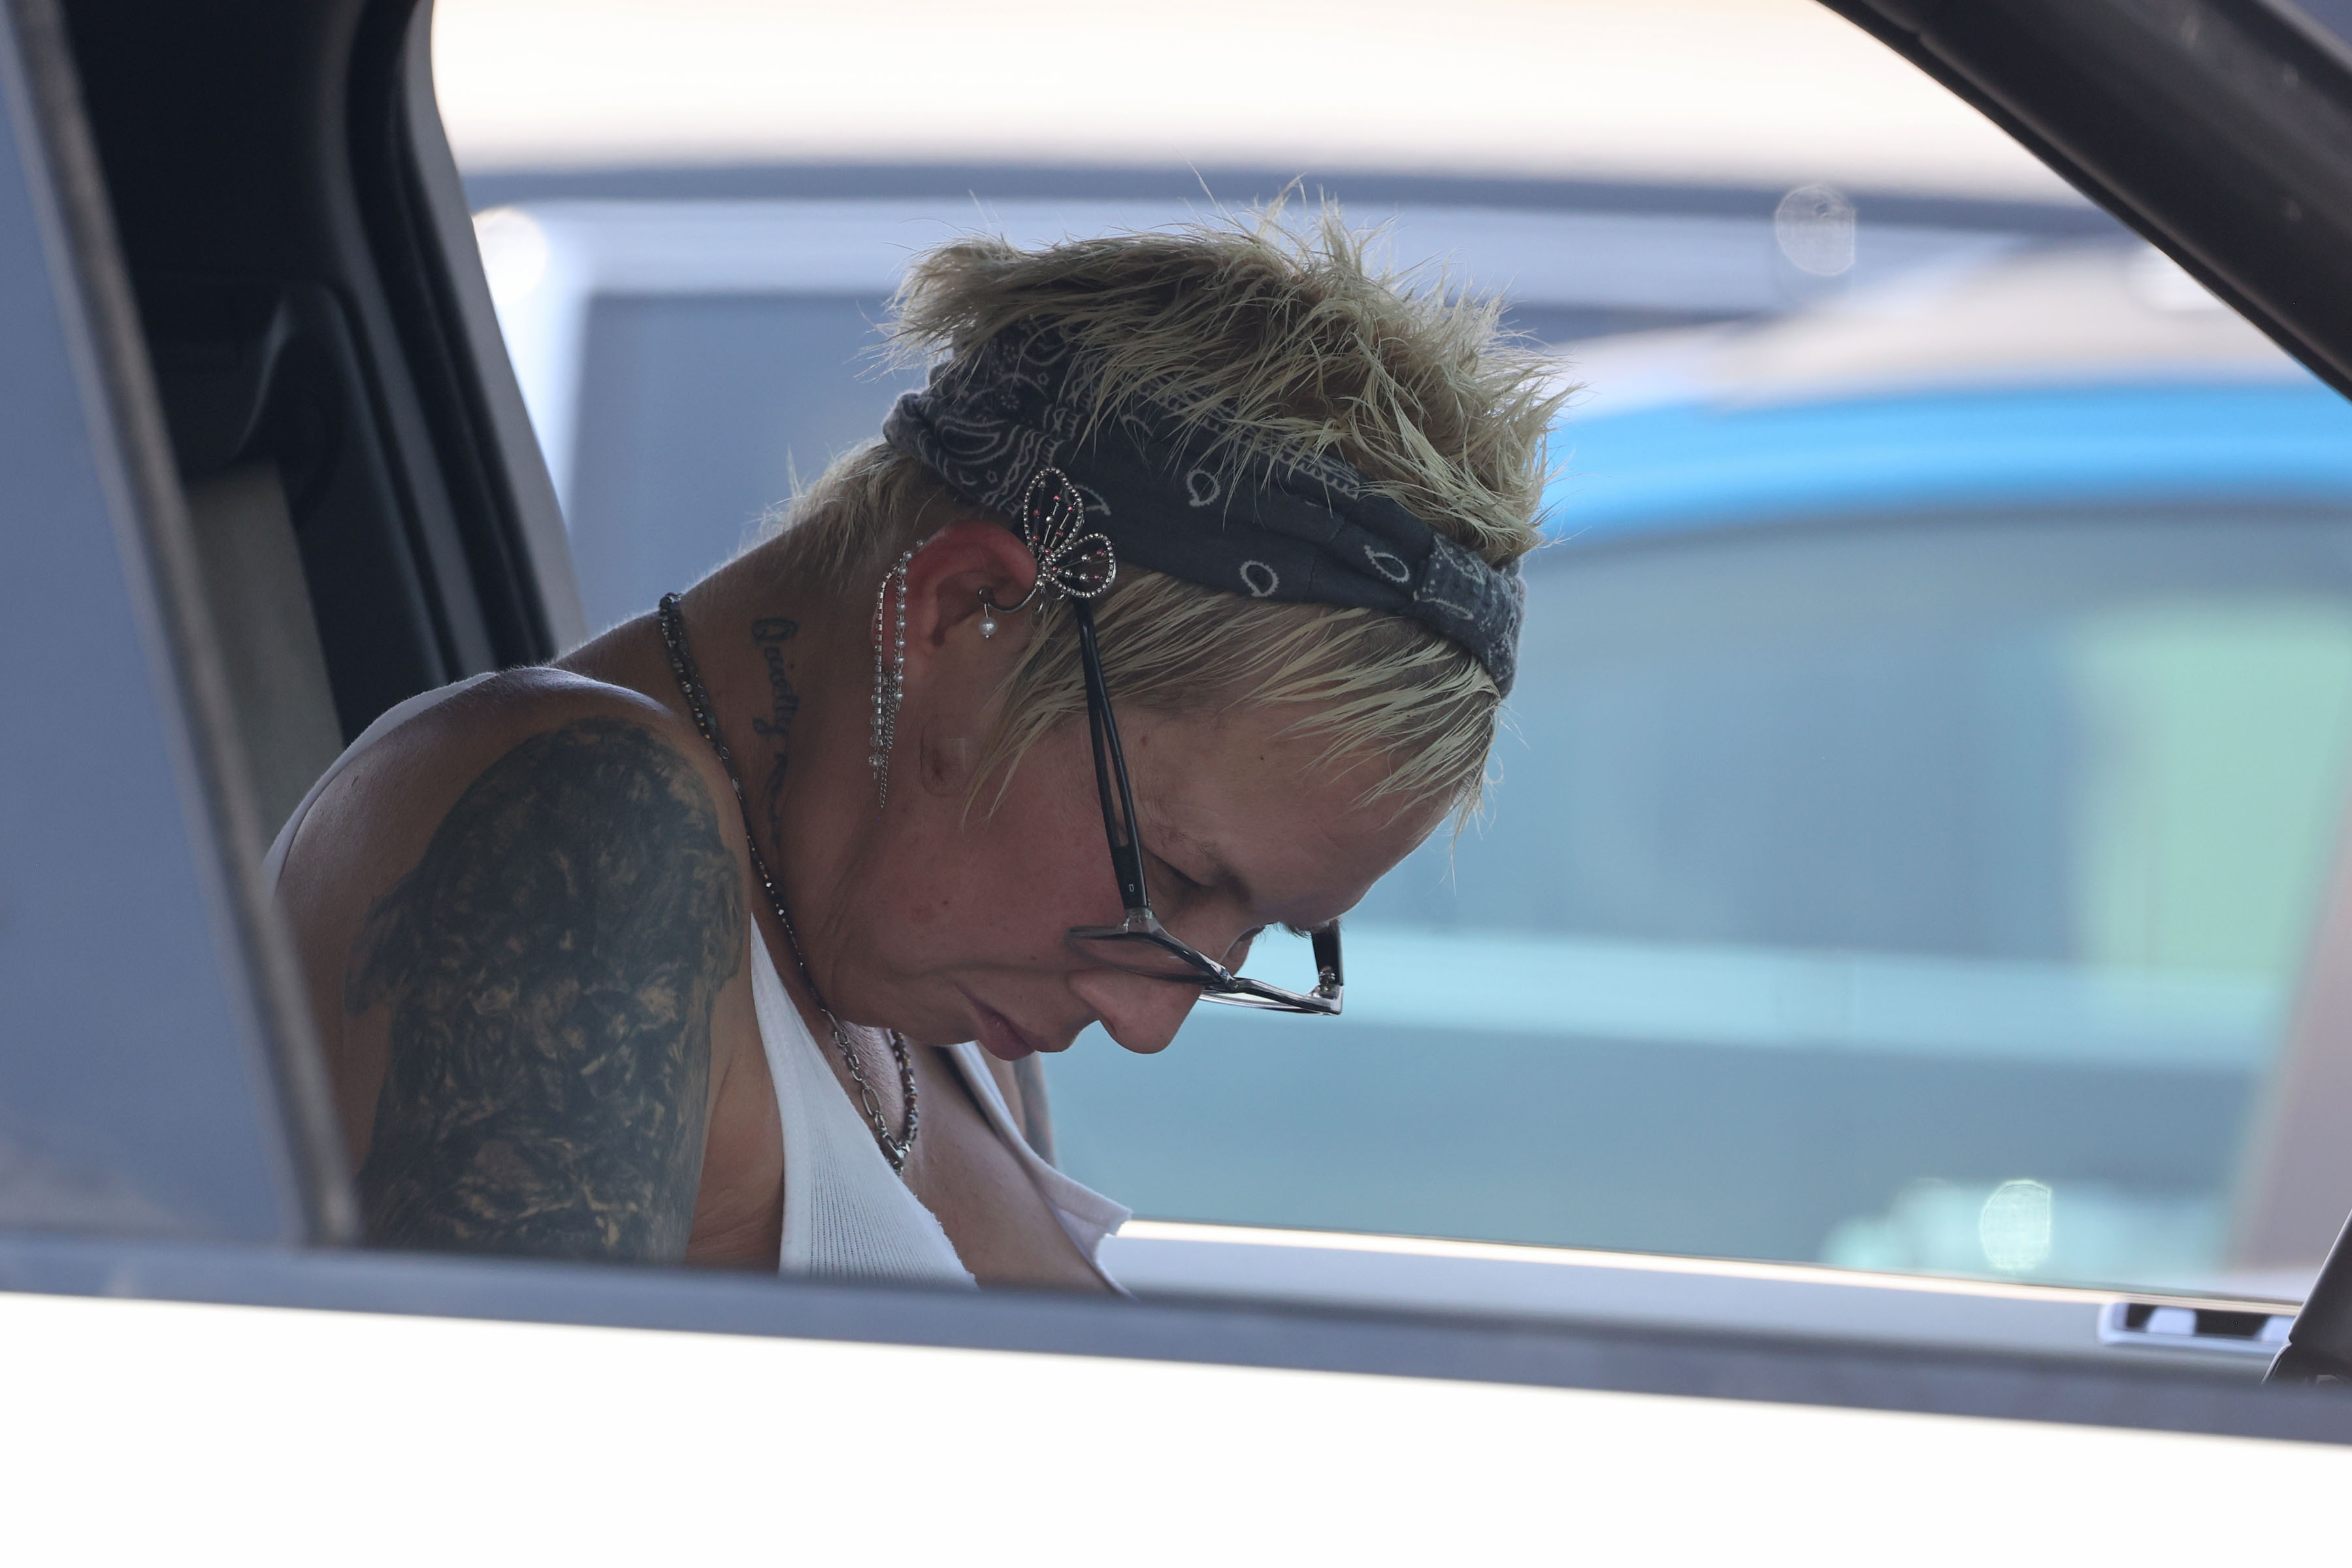 Kim Mathers snoozed in the car during a shipping trip close to her home in Michigan